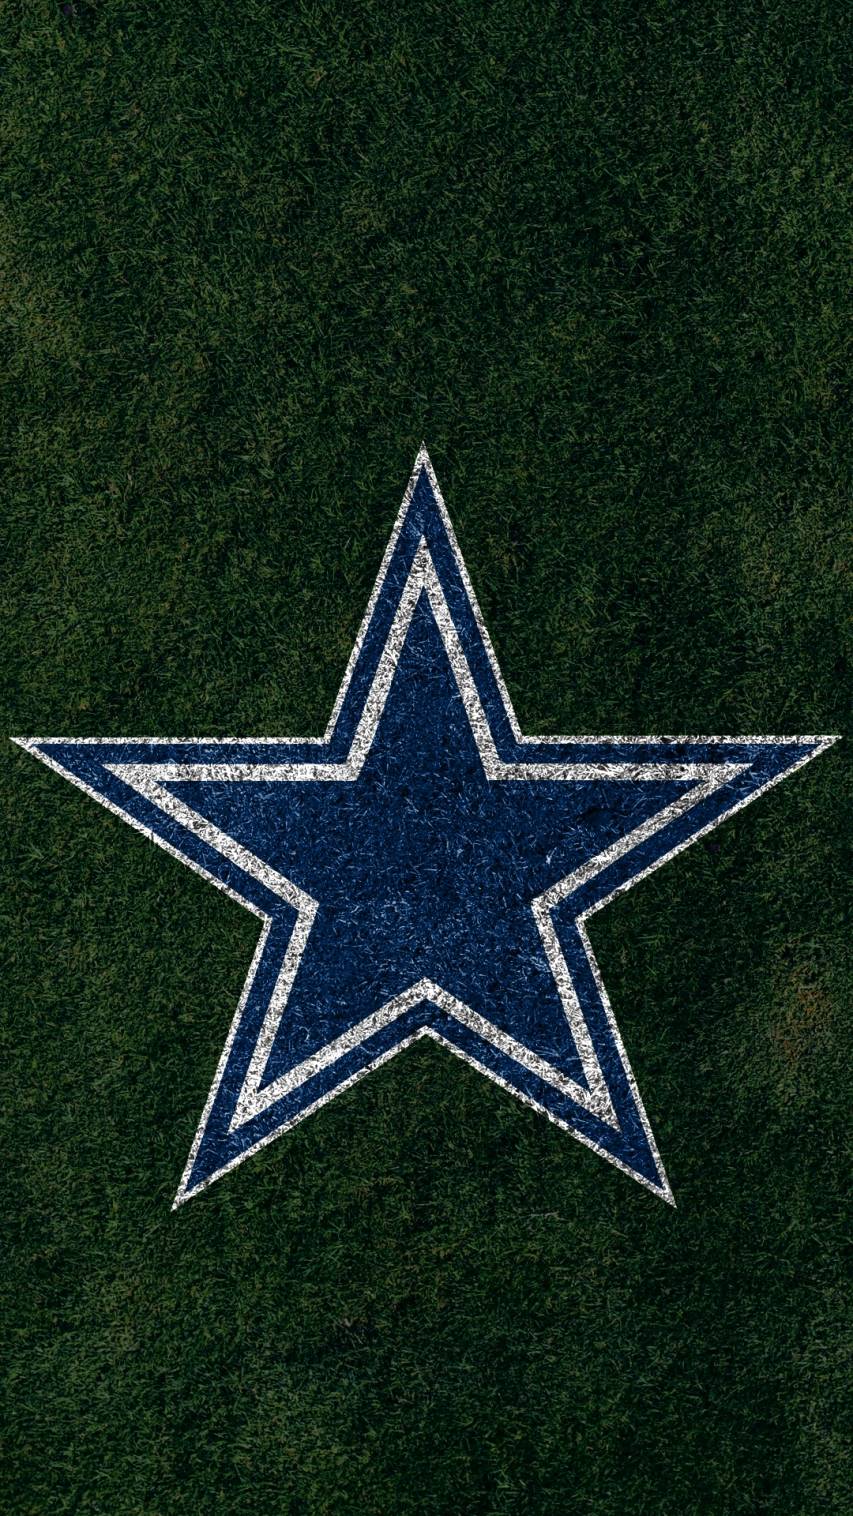 Free Dallas Cowboys Wallpaper for iPhone